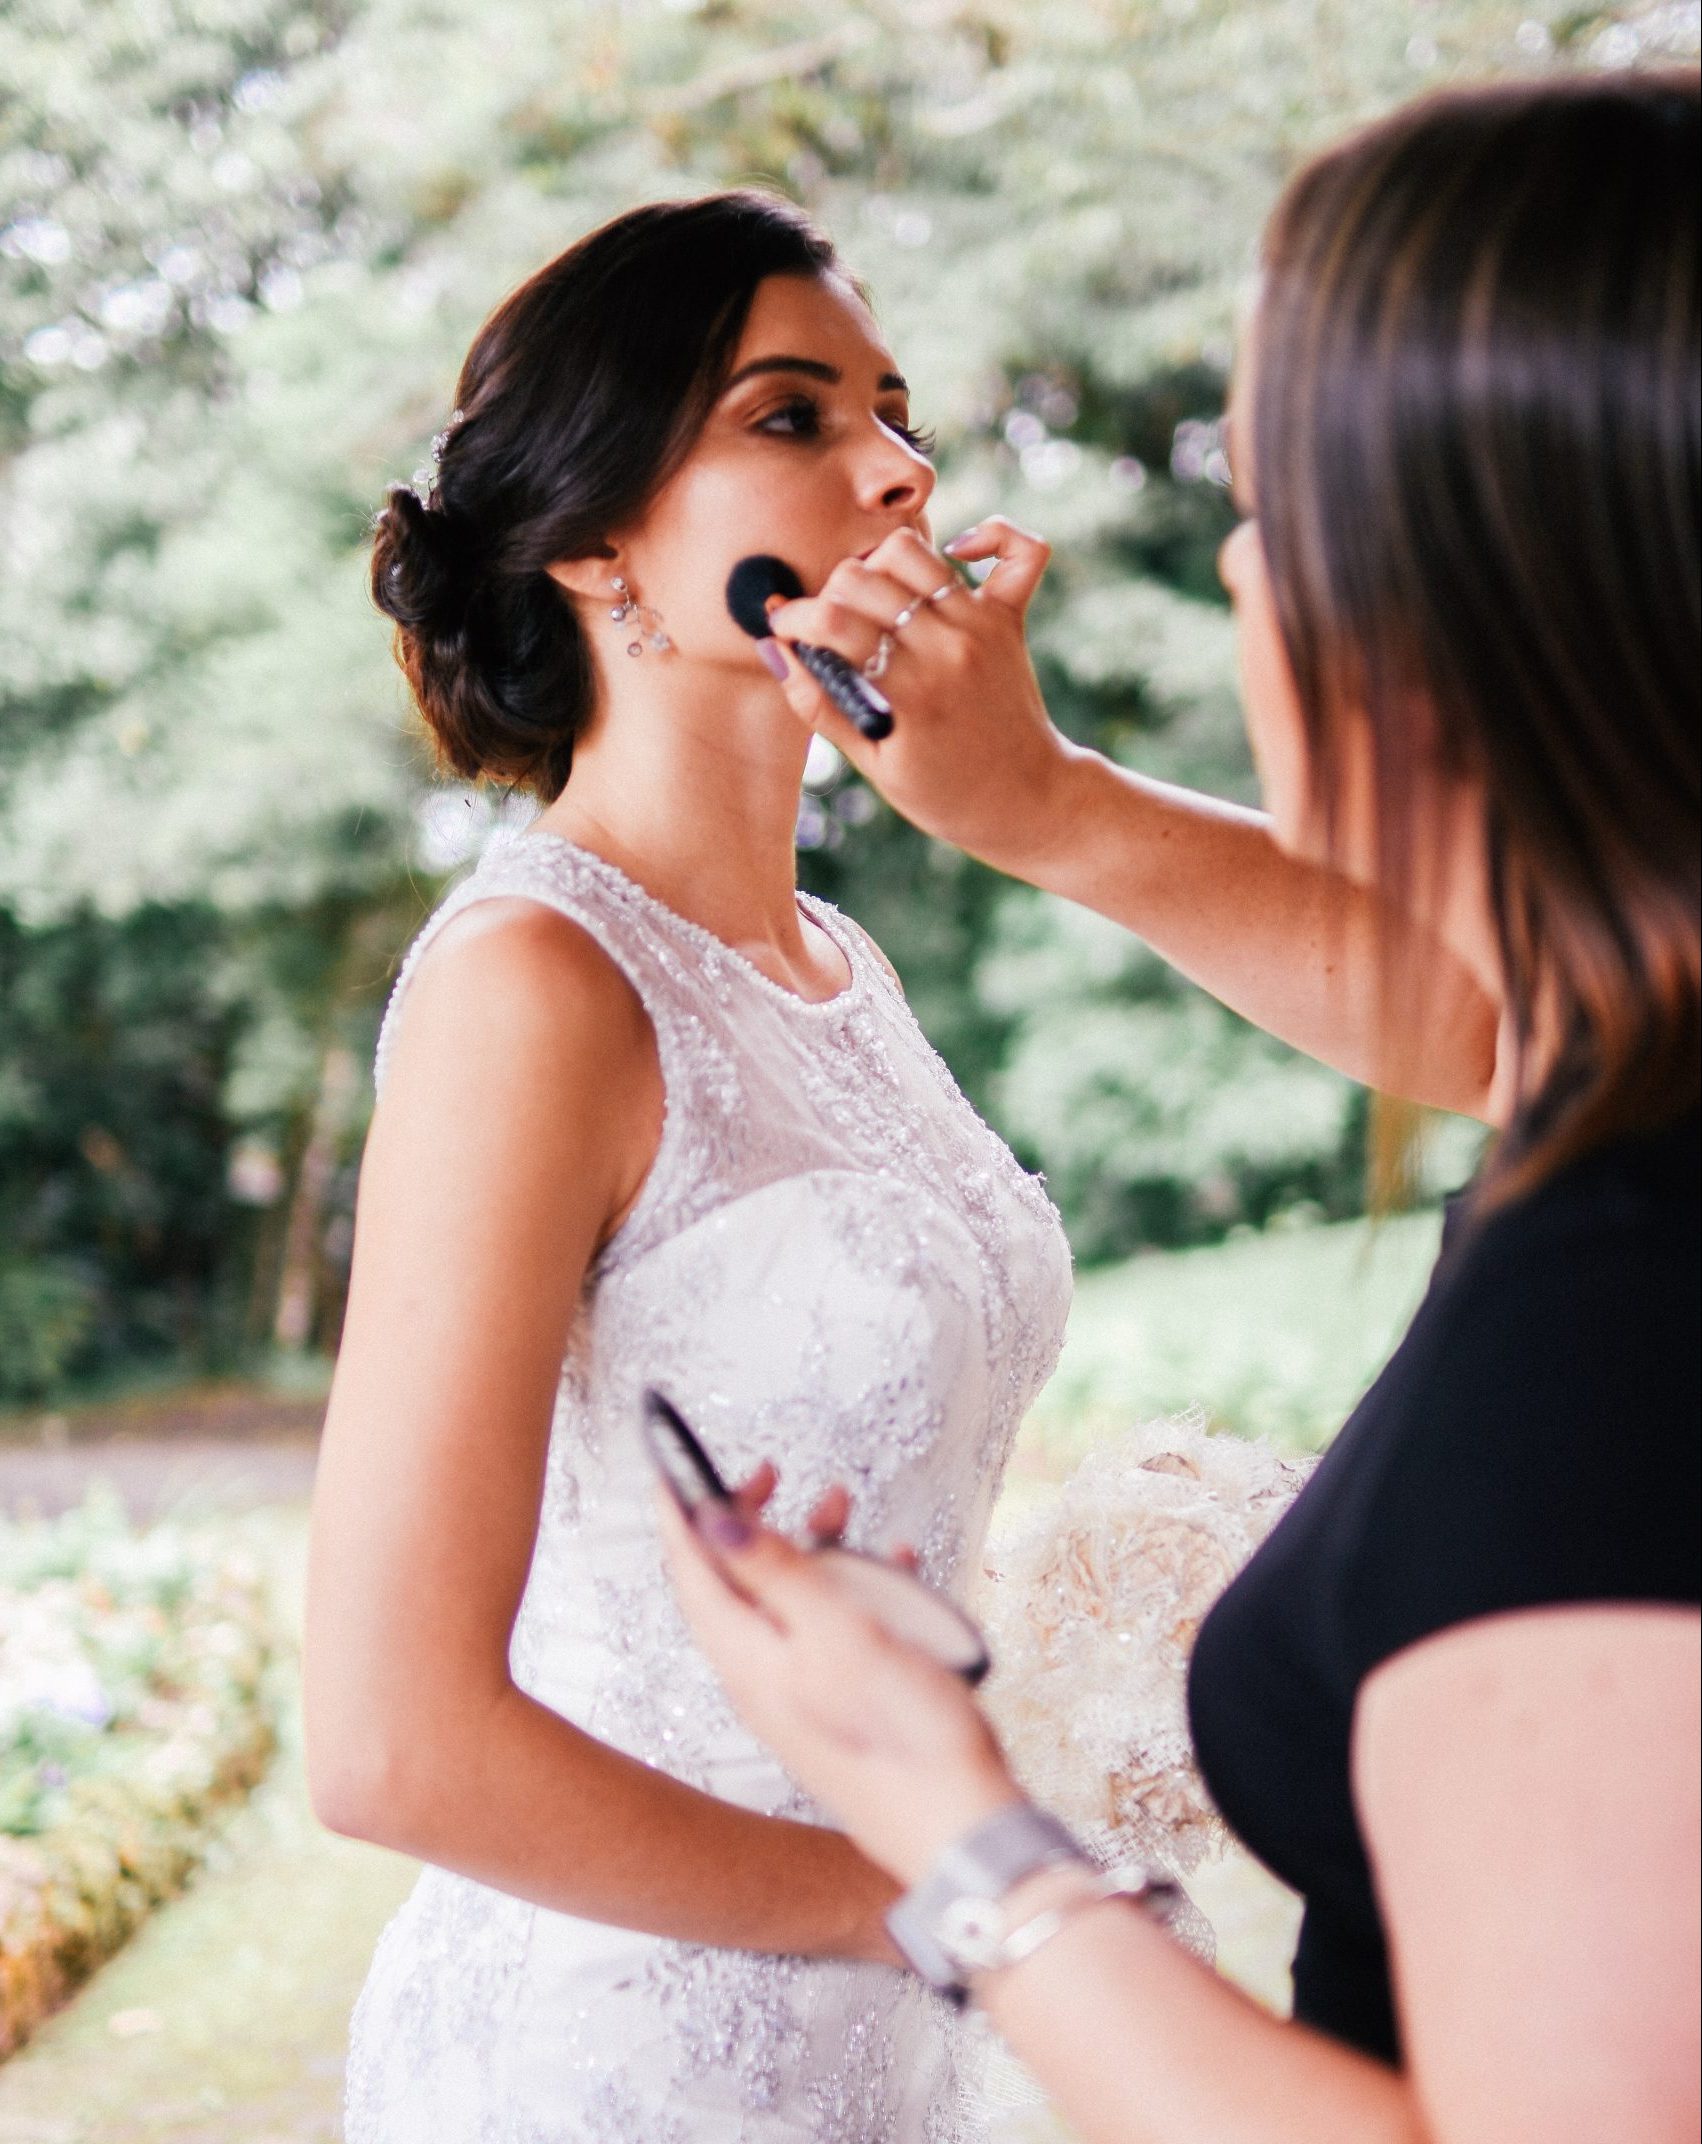 The training you need to be a makeup artist